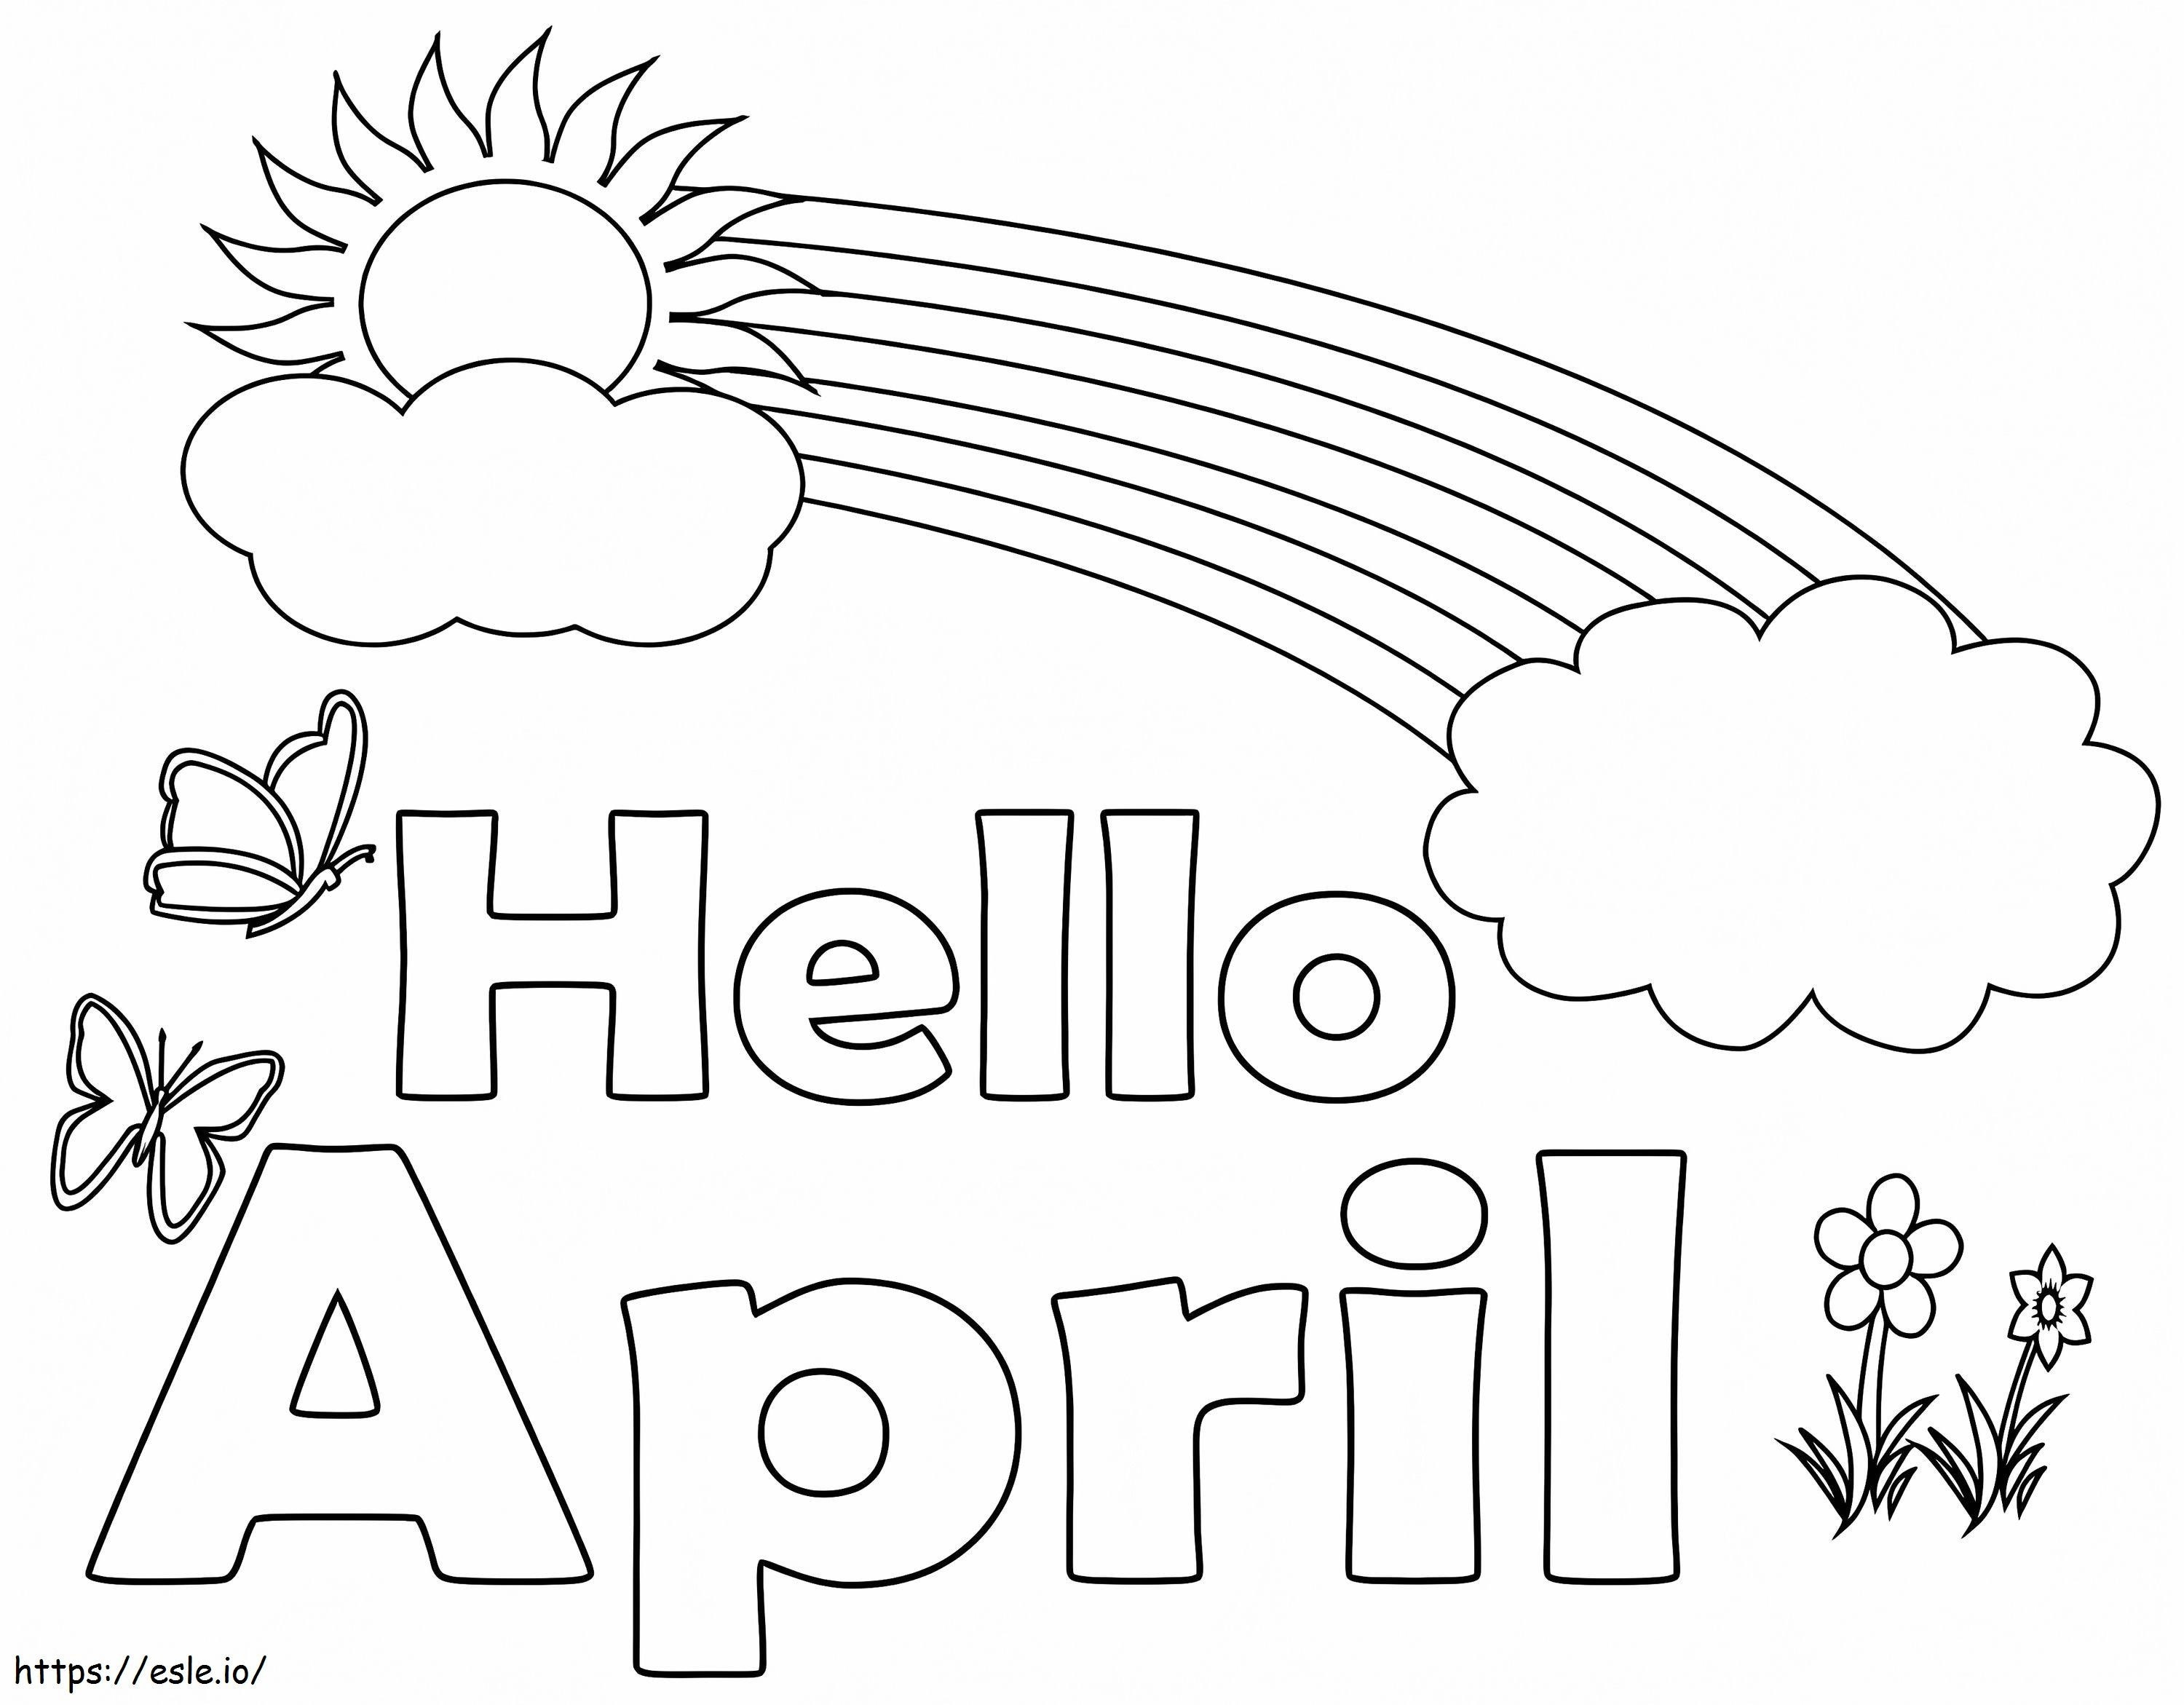 Hello April Coloring Page coloring page